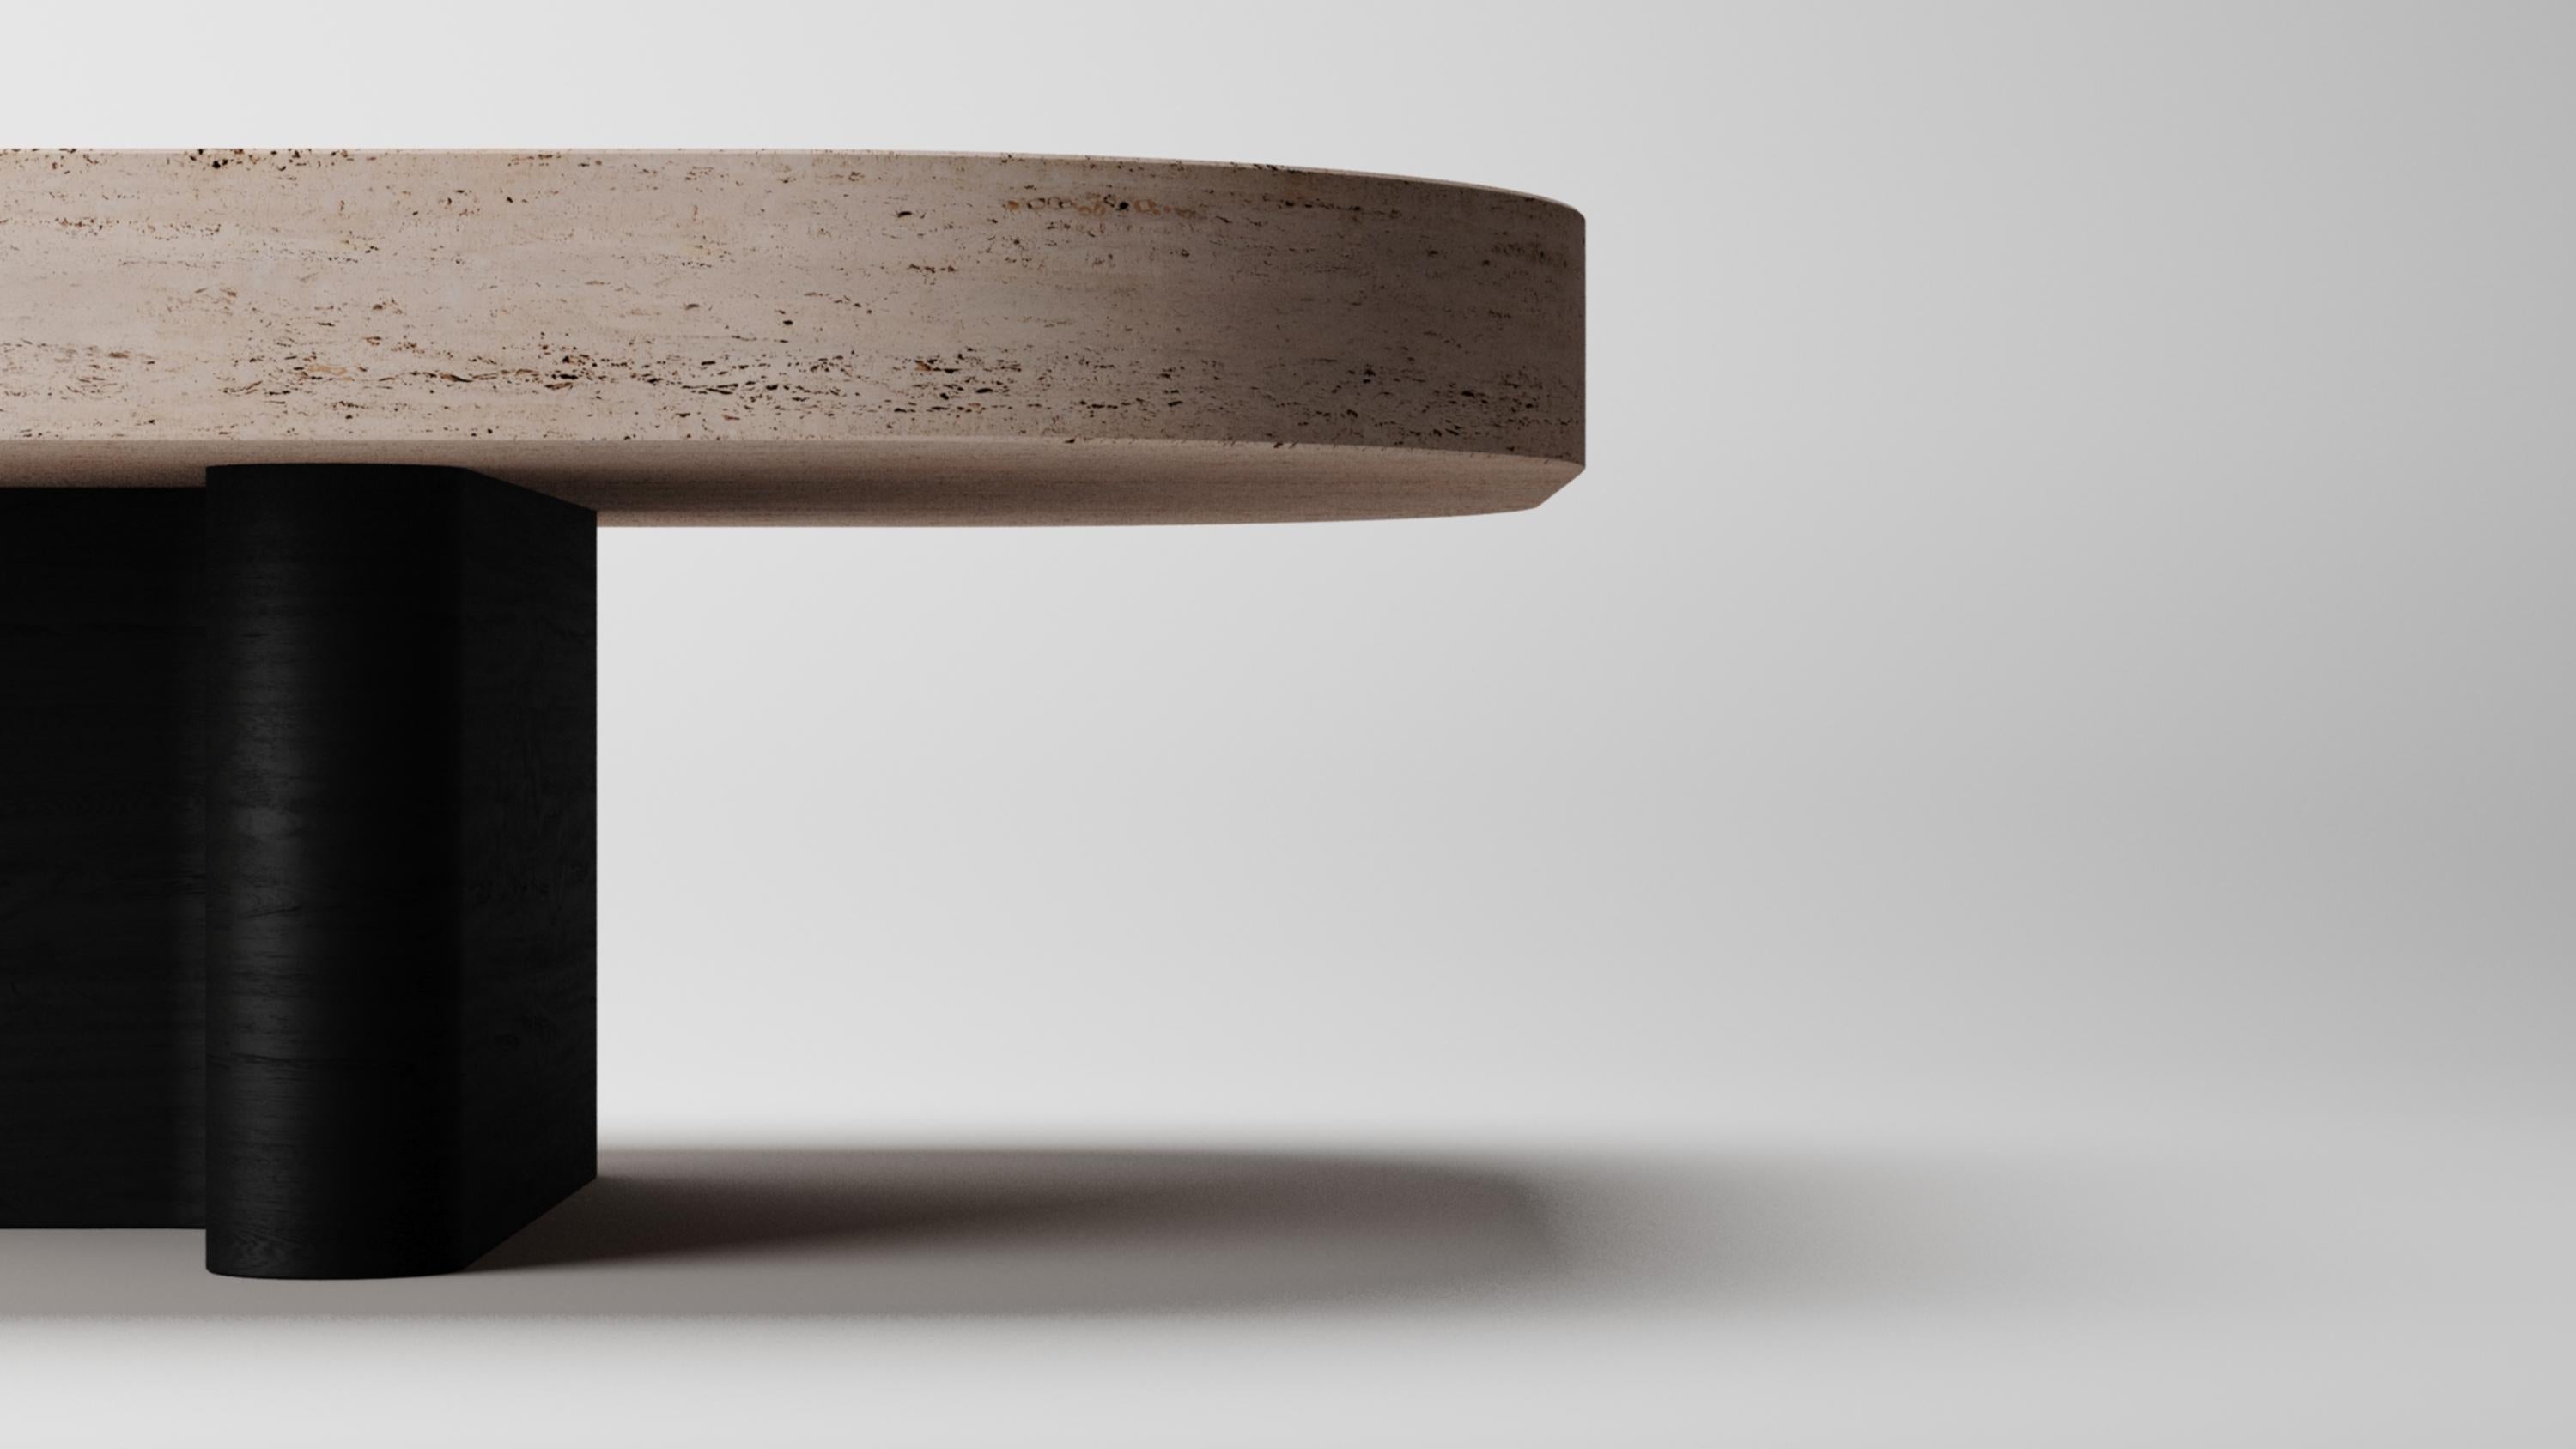 Collector - Designed by Studio Rig Meco Center Table Black Oak and Travertino

Collector brand was born and Portugal and aims to be part of daily life by fusing furniture to home routines and lifestyles. The company designs its pieces with the